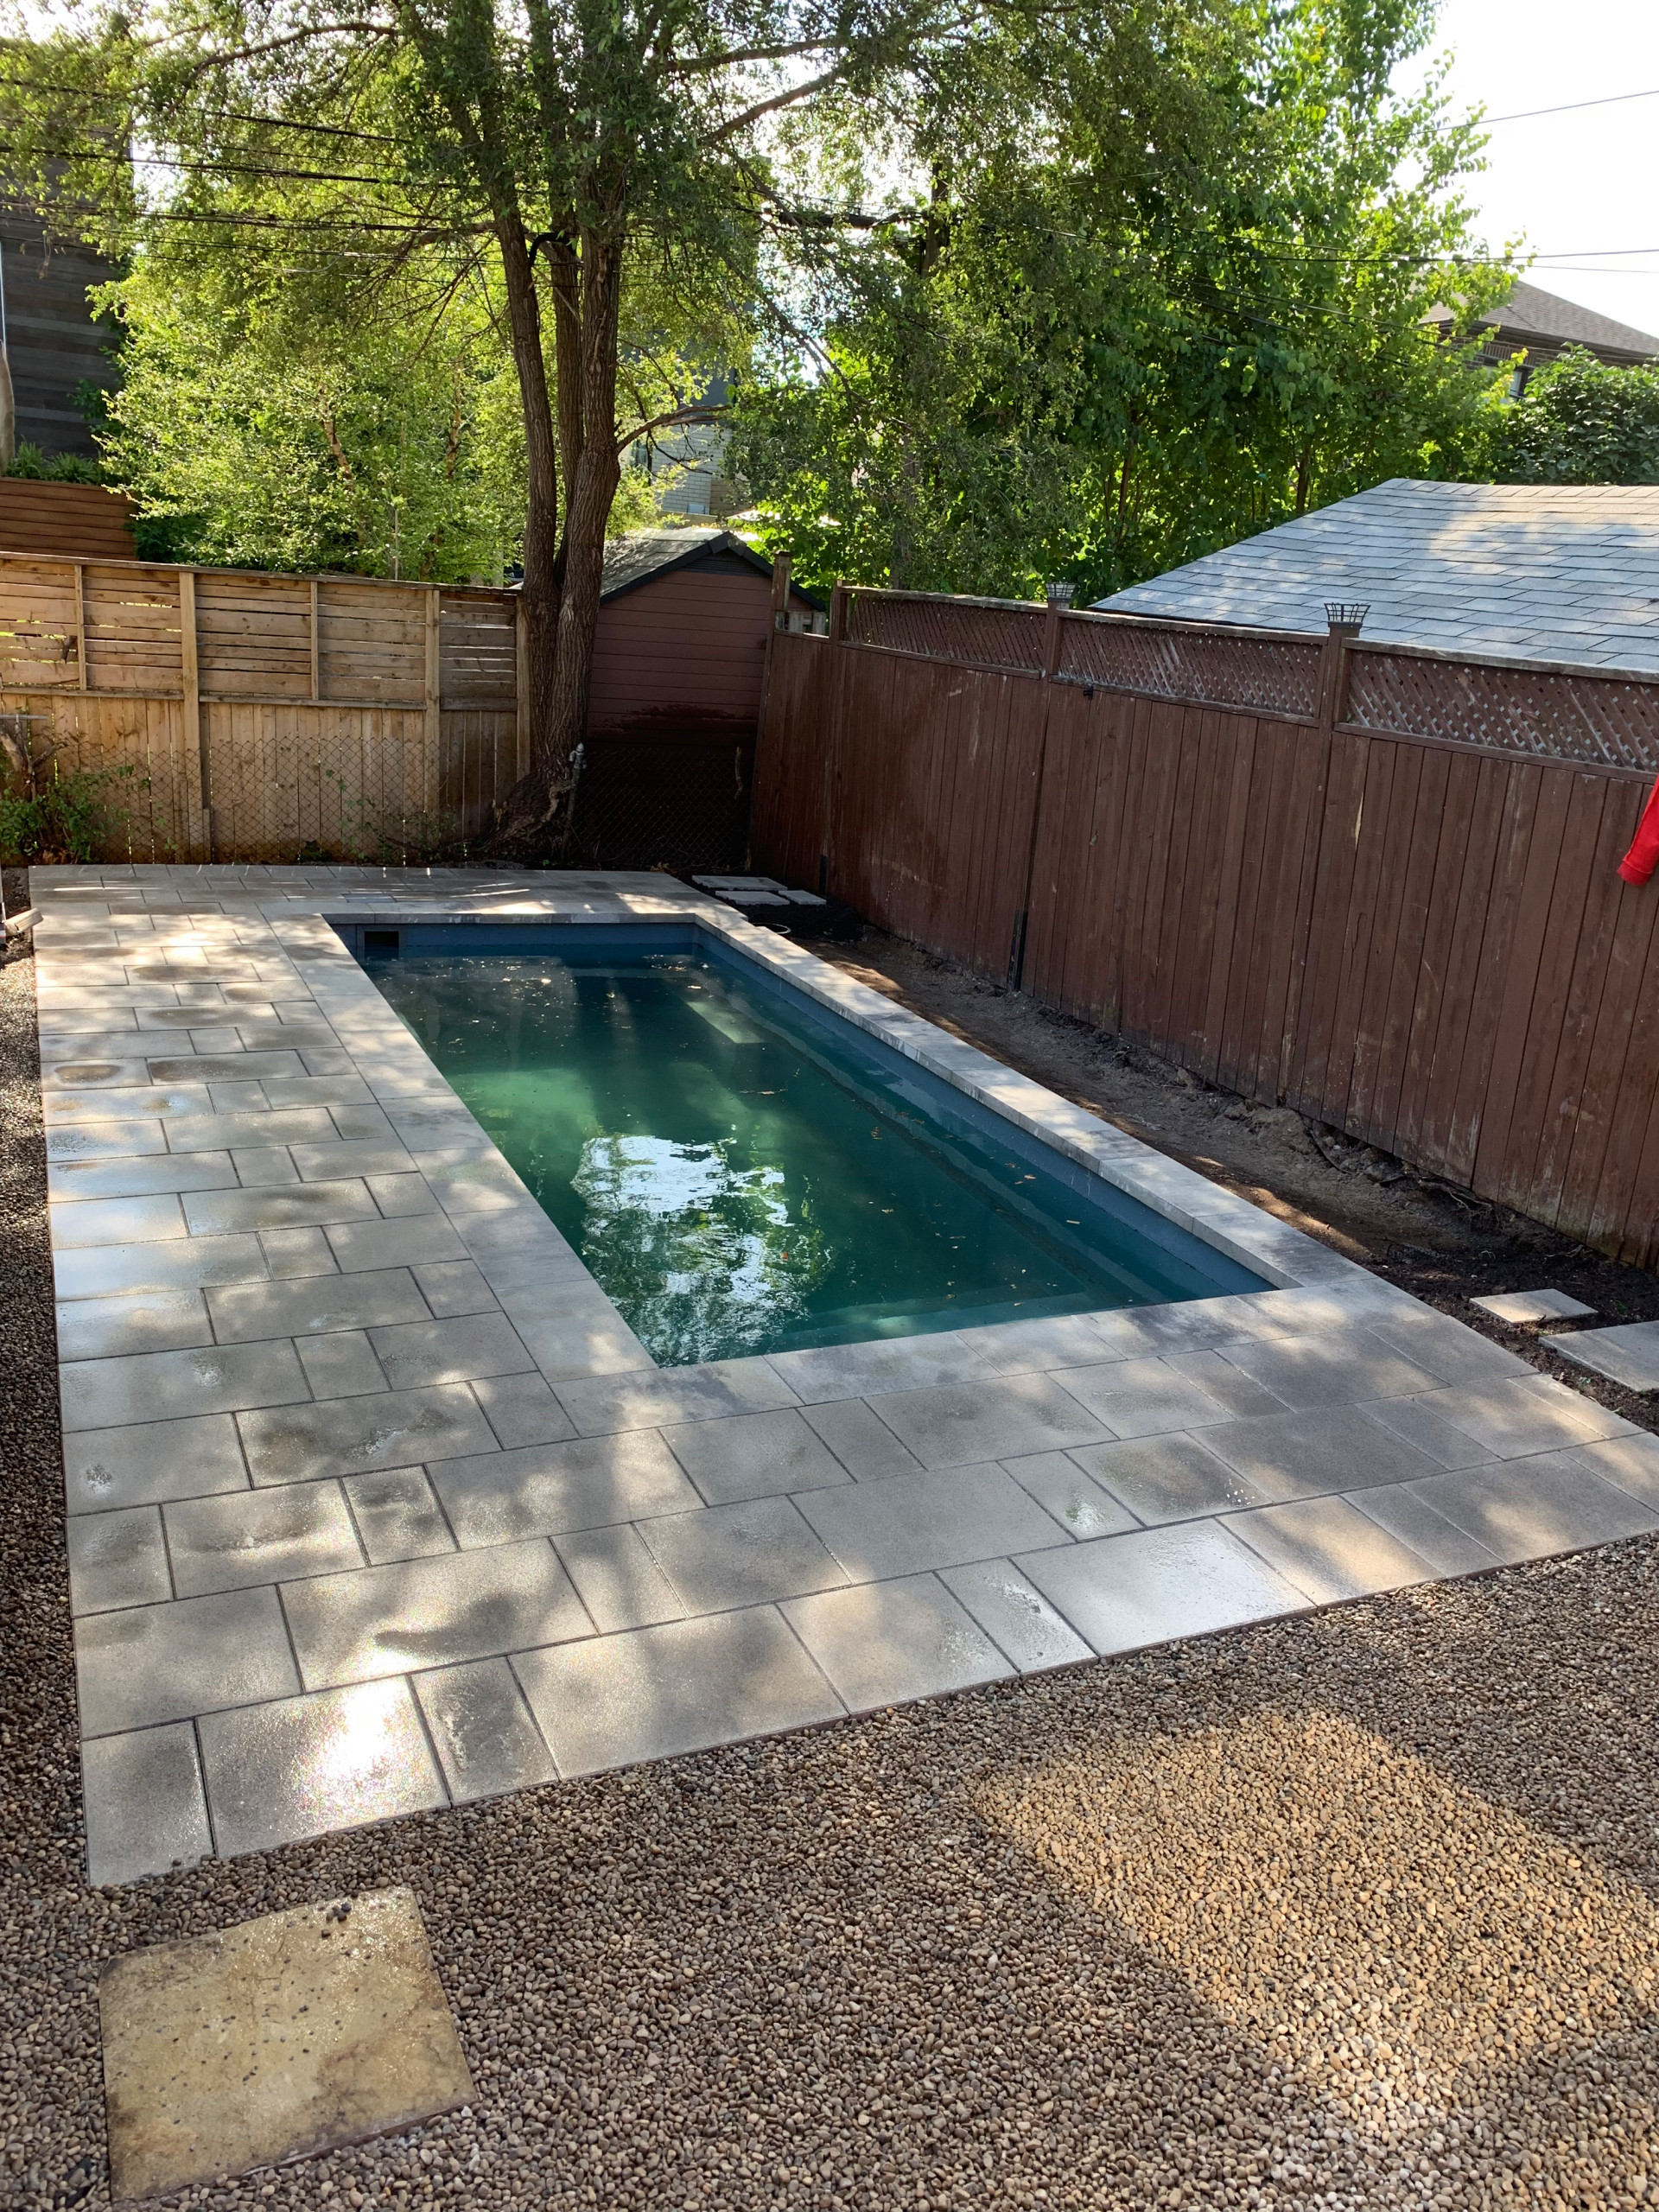 The East York Small Pool Project